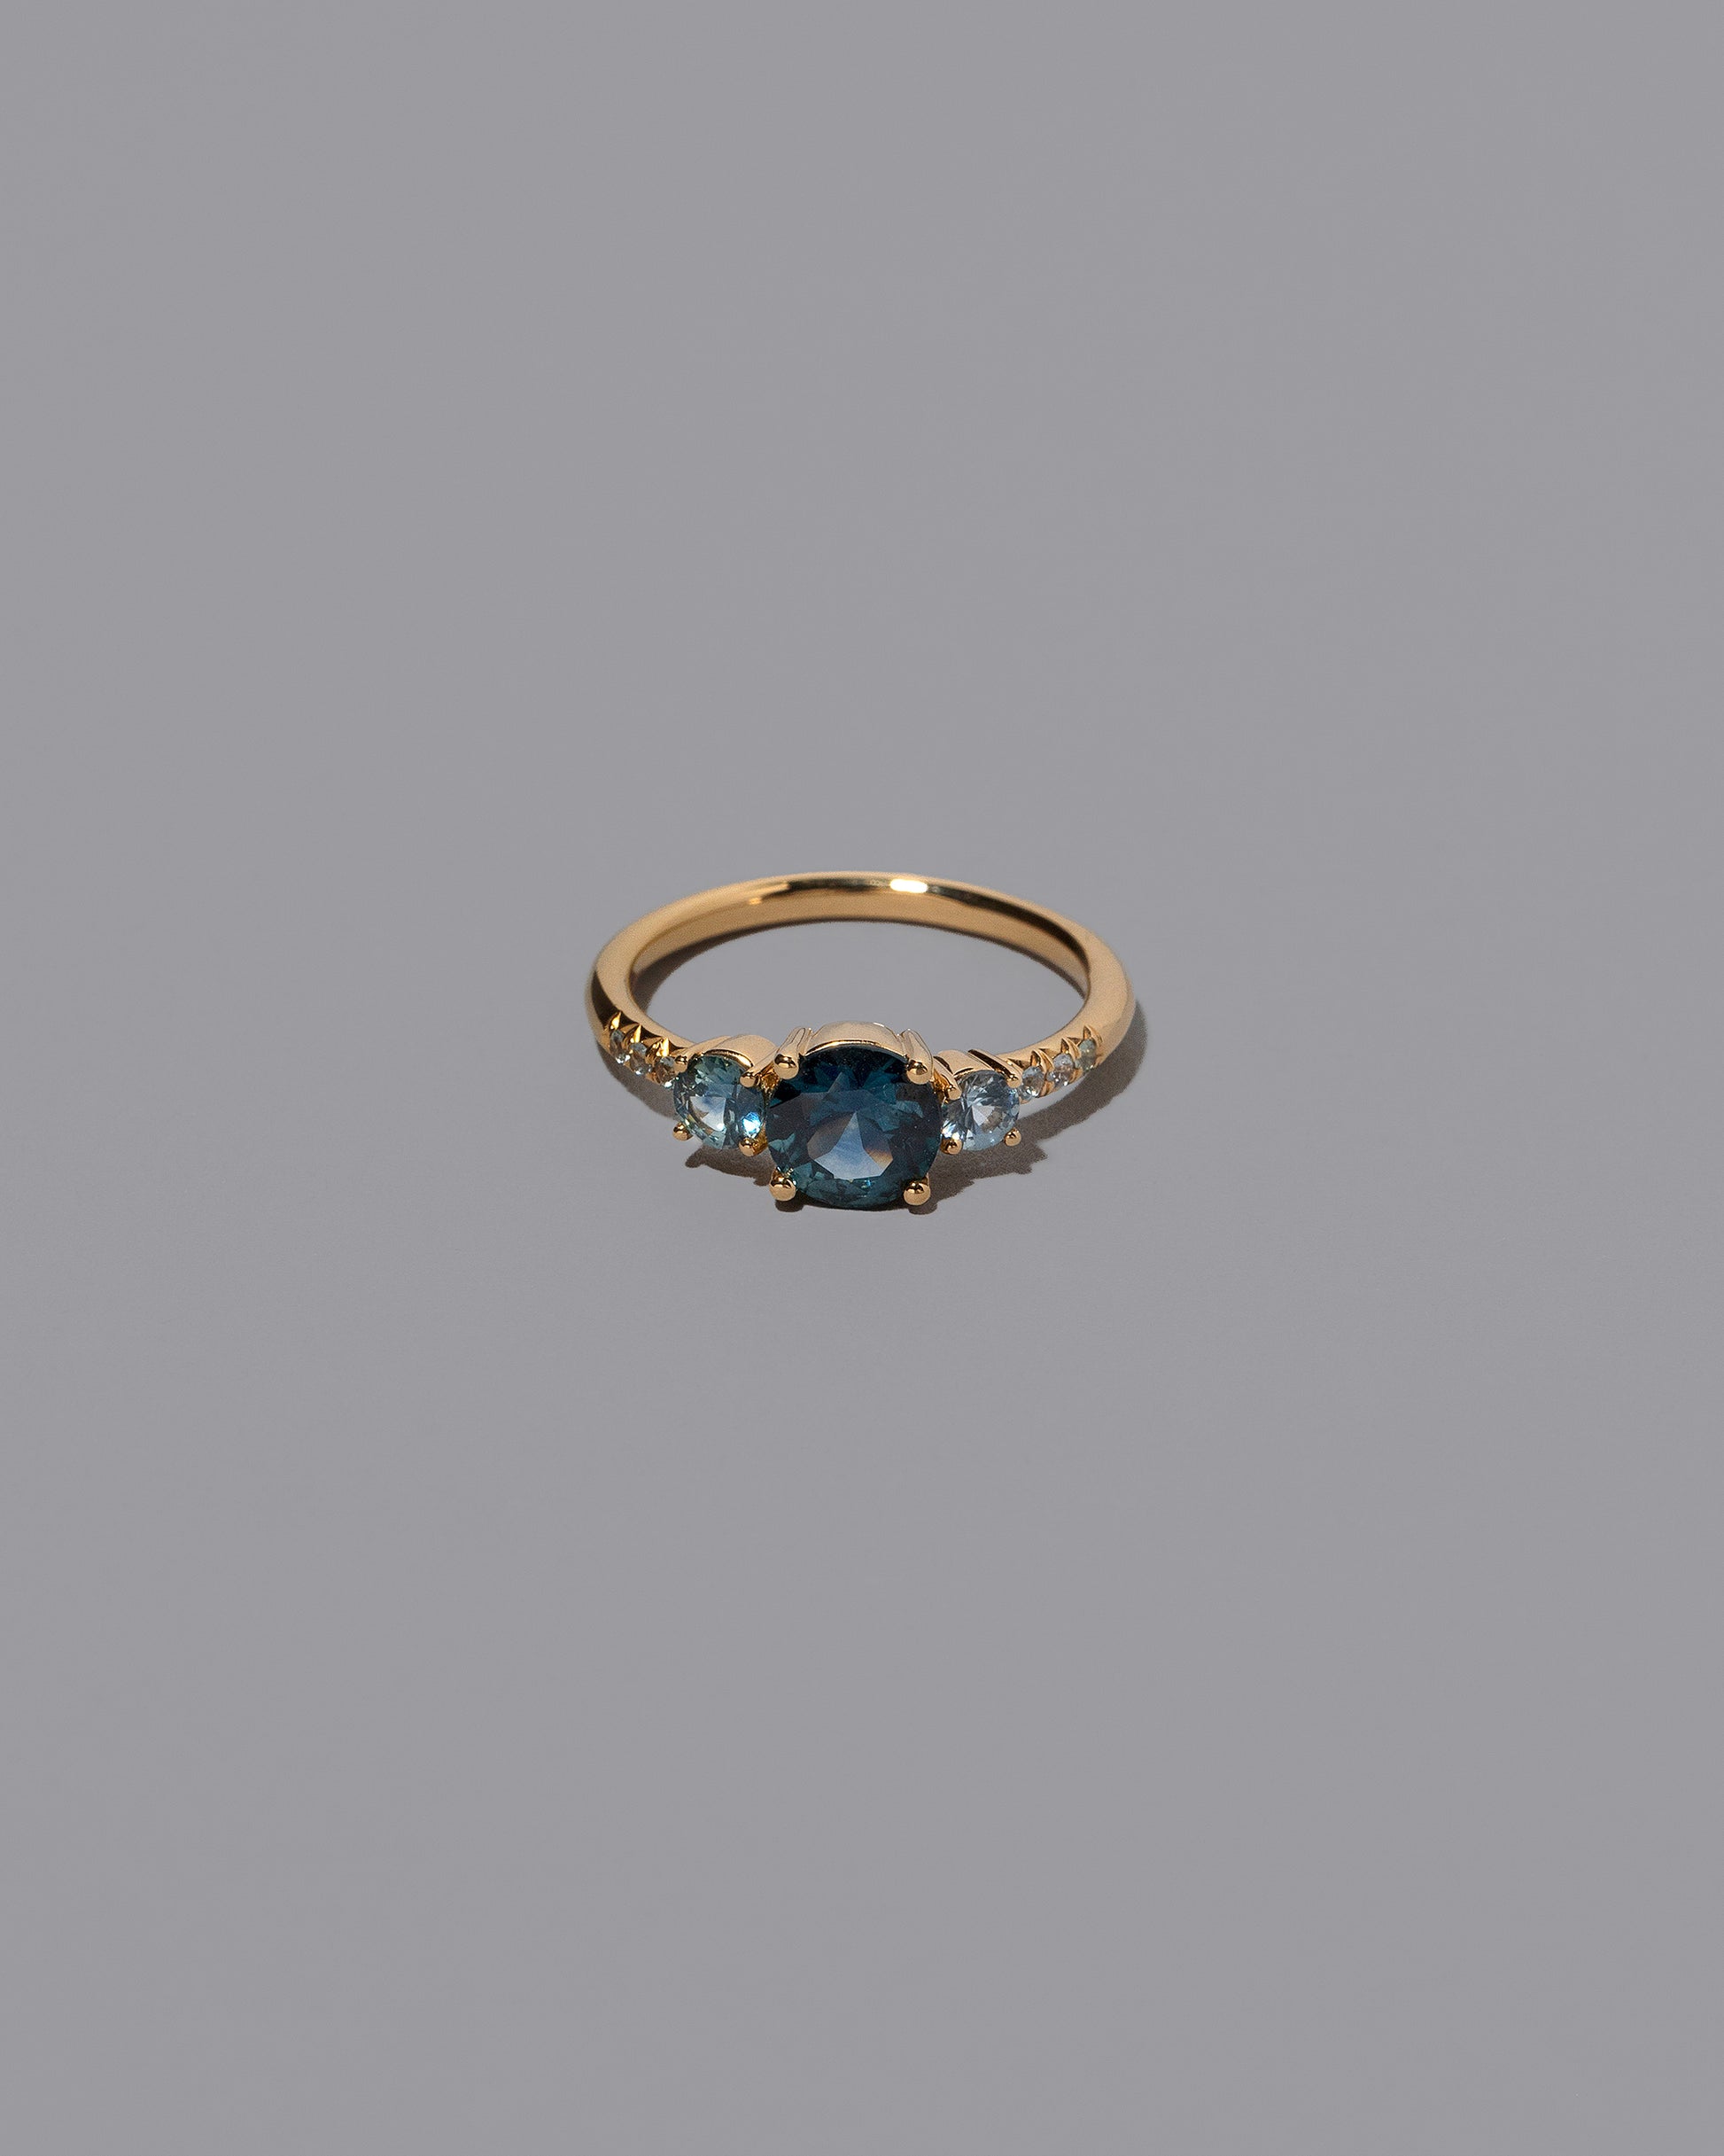 Sapphire Orion Ring on grey color background.